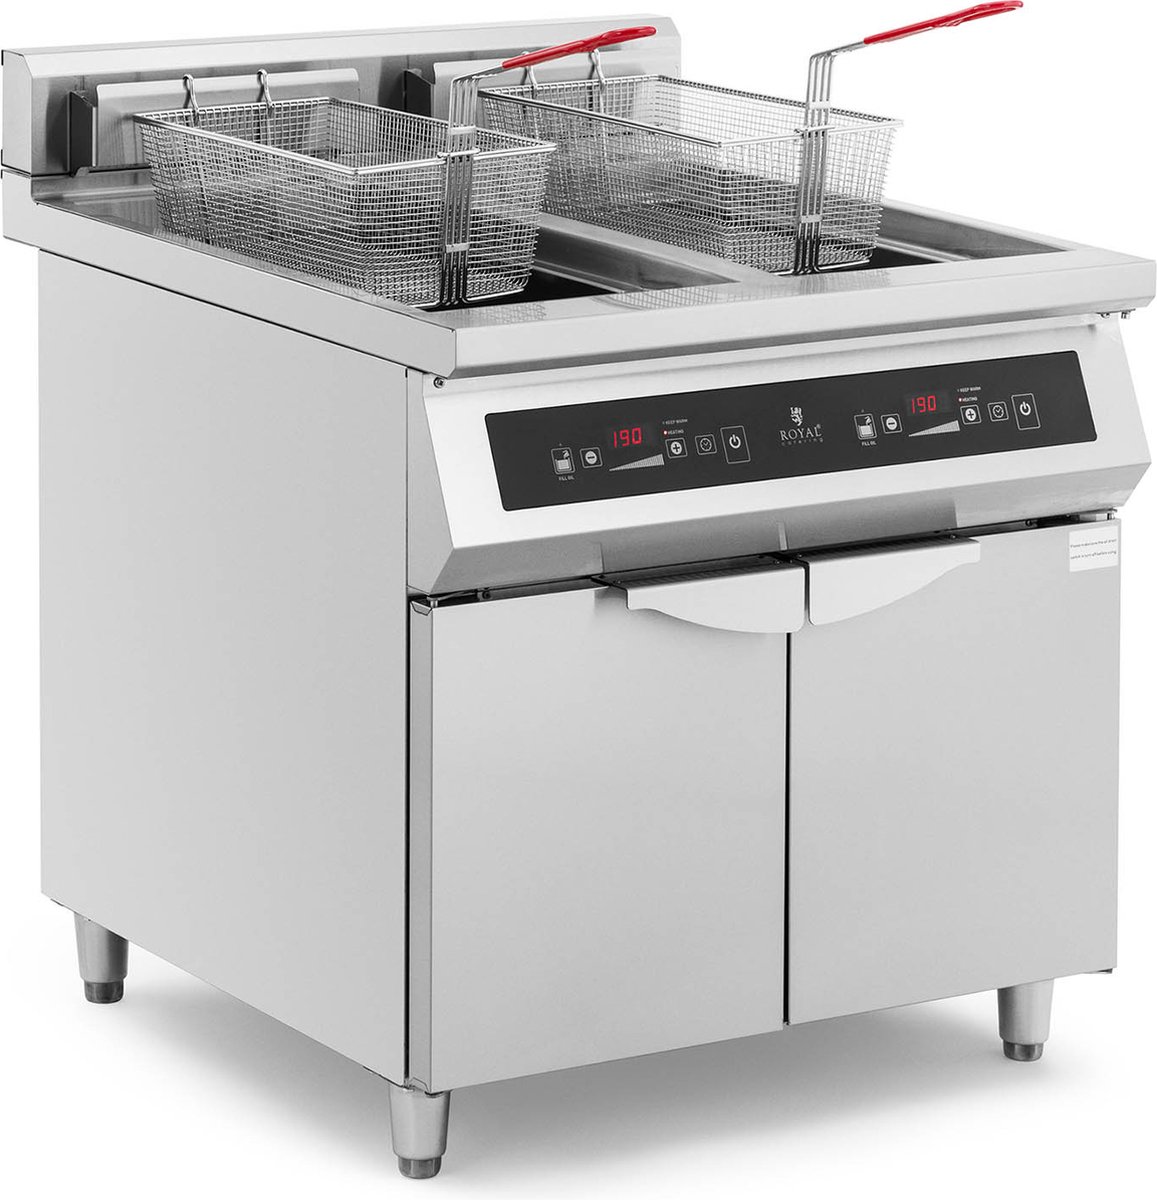 Royal Catering Inductiefriteuse - 2 x 30 L - 60 tot 190 °C - Royal Catering